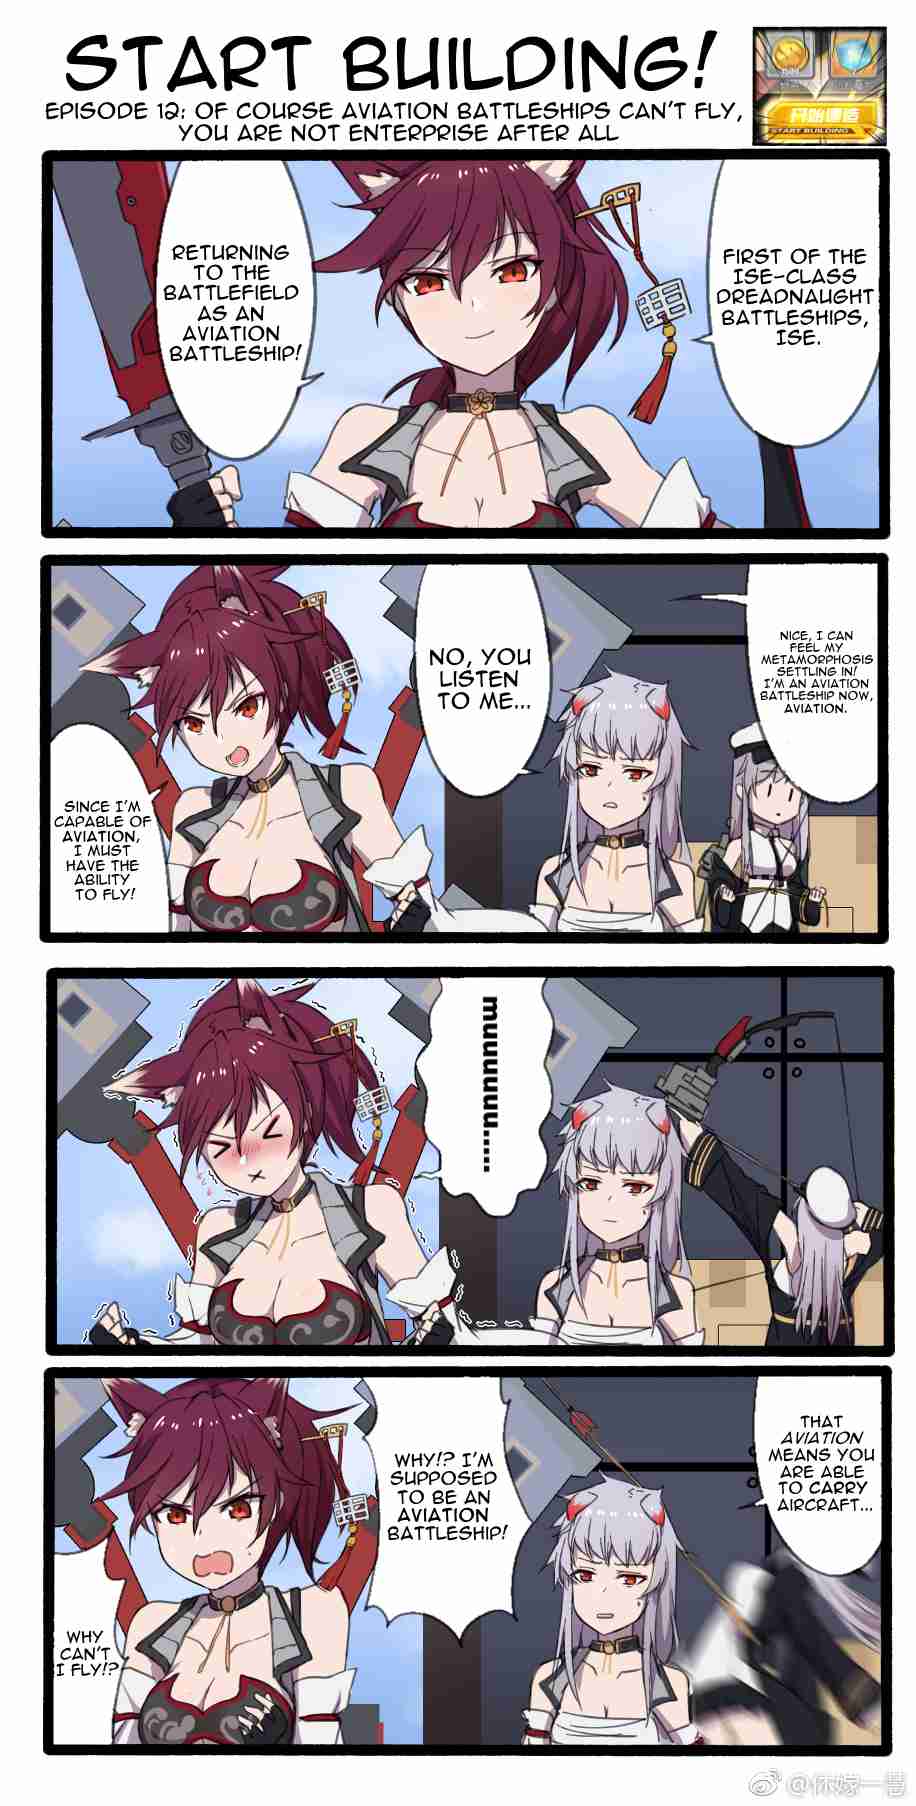 Azur Lane: Start Building! Ch. 12 Of Course Aviation Battleships Don't Fly, You Are Not Enterprise After All